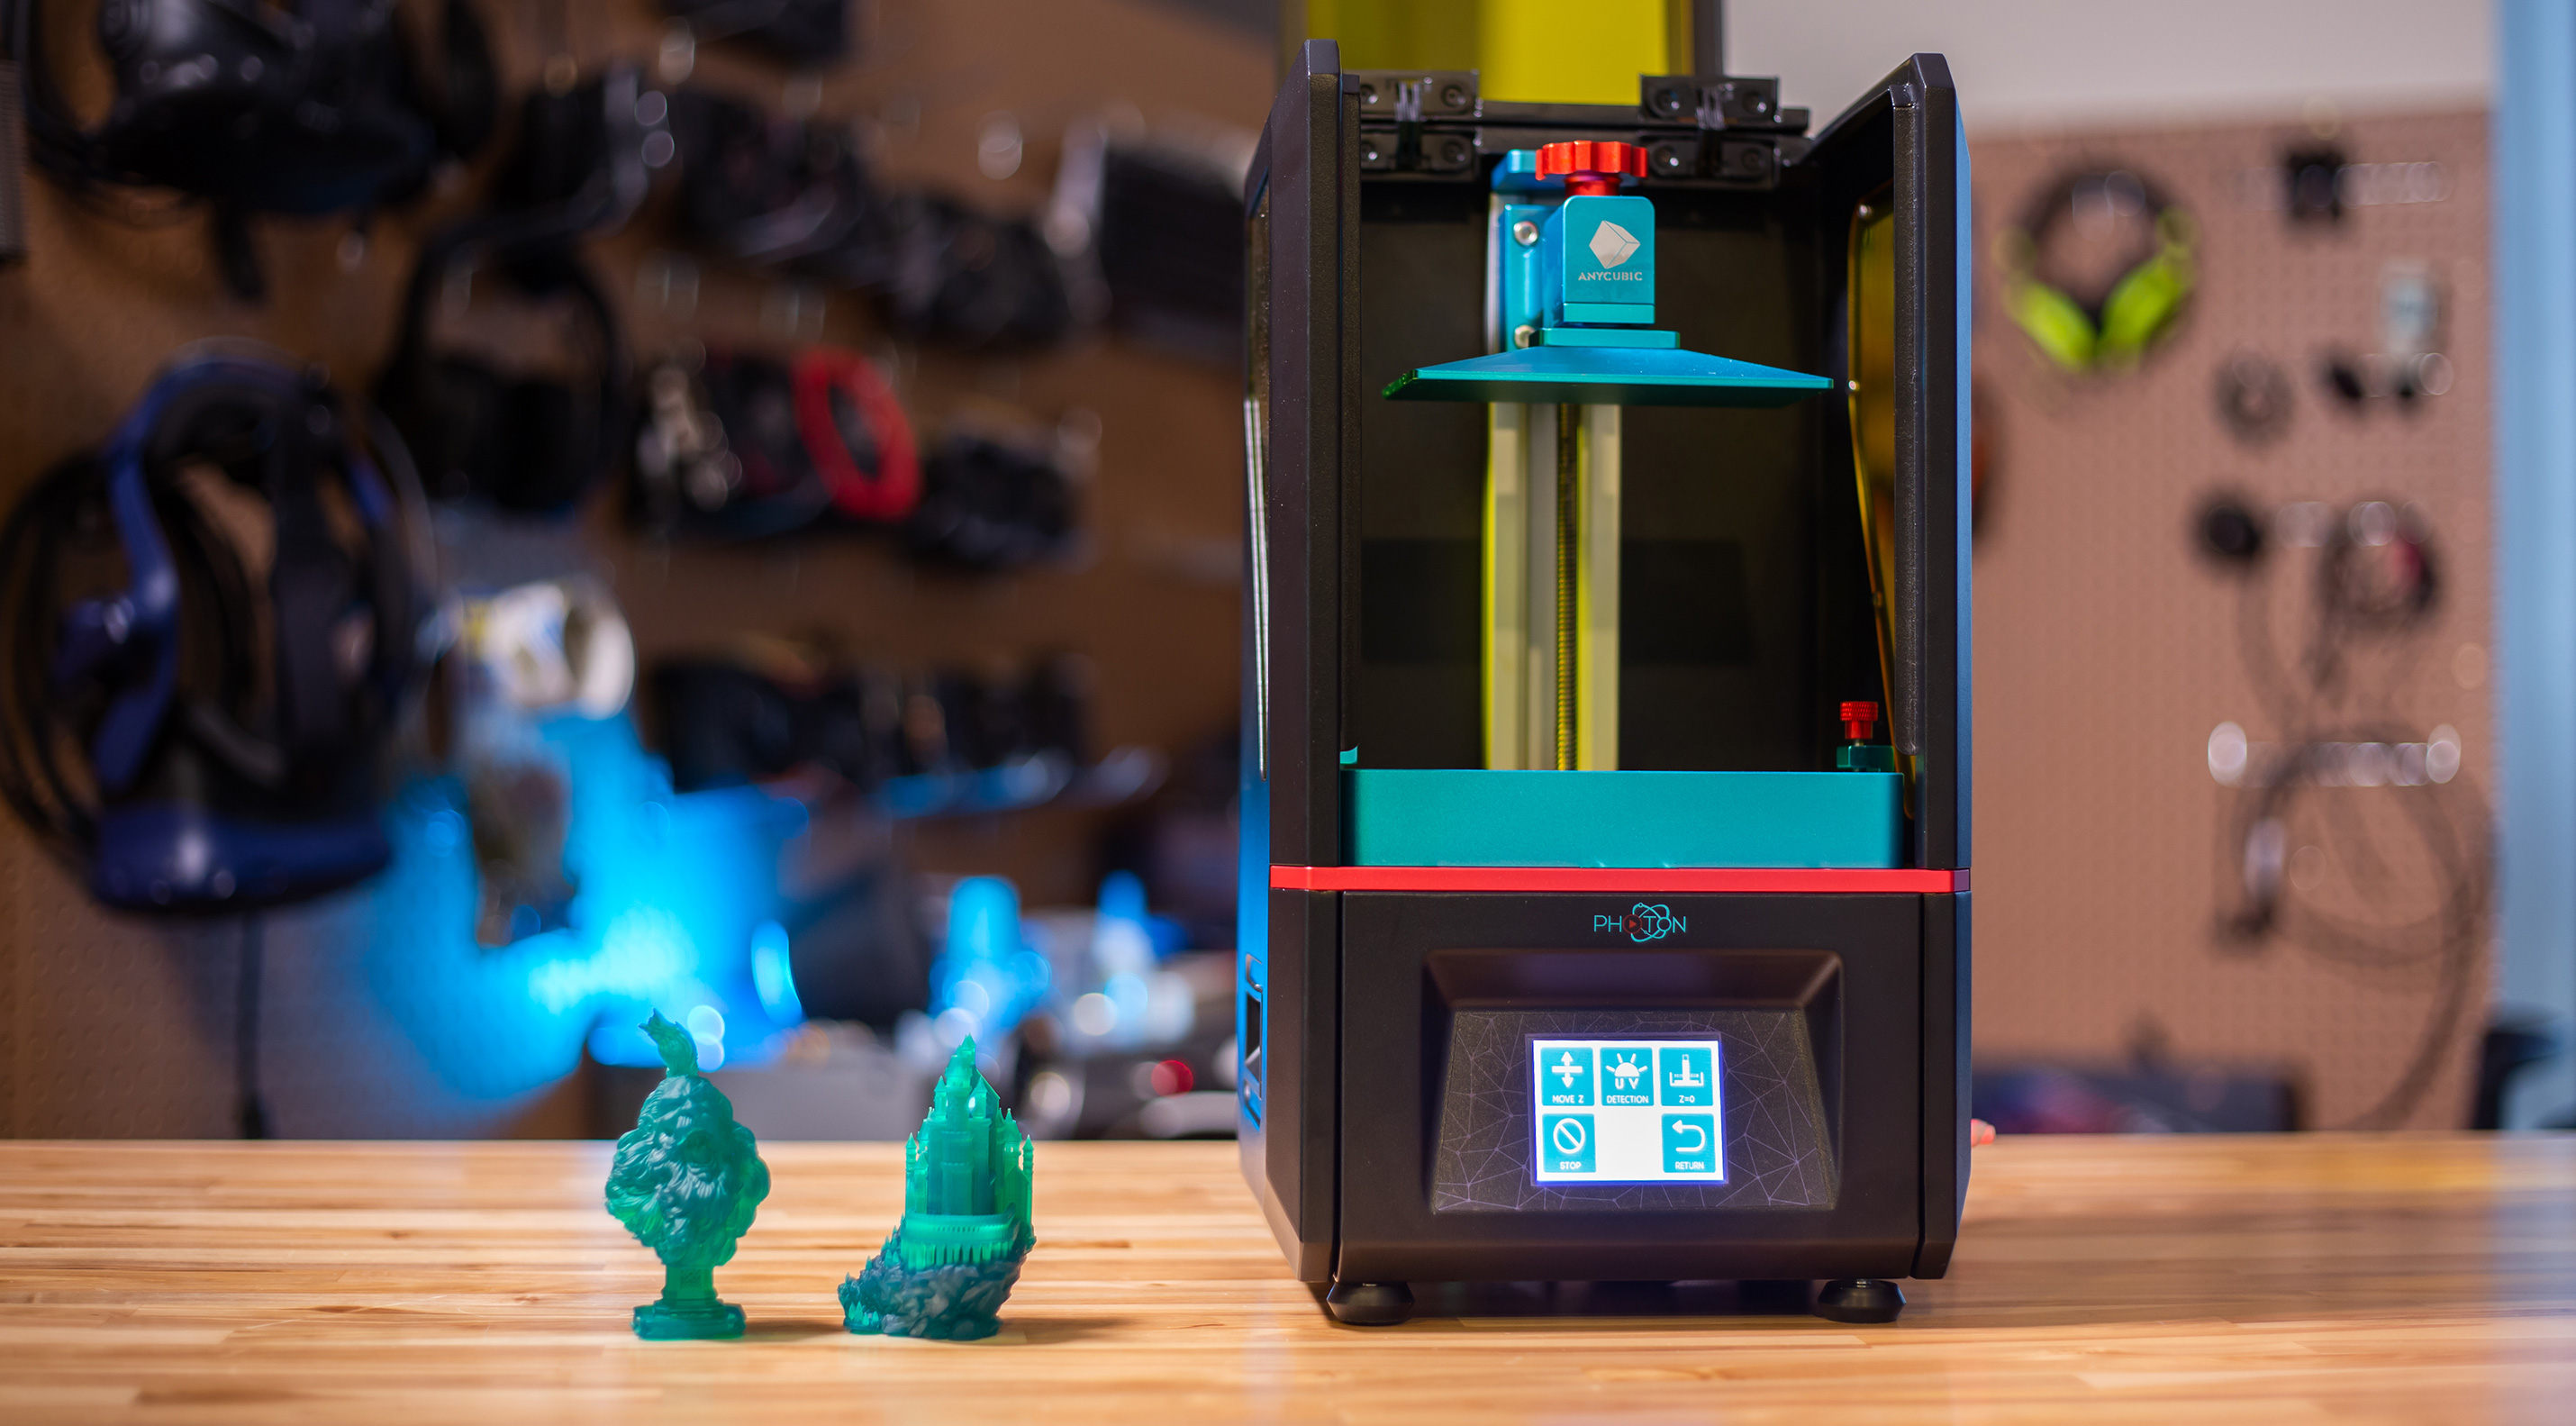 Peer Svag Integral Anycubic Photon 3D Printer Review | Digital Trends